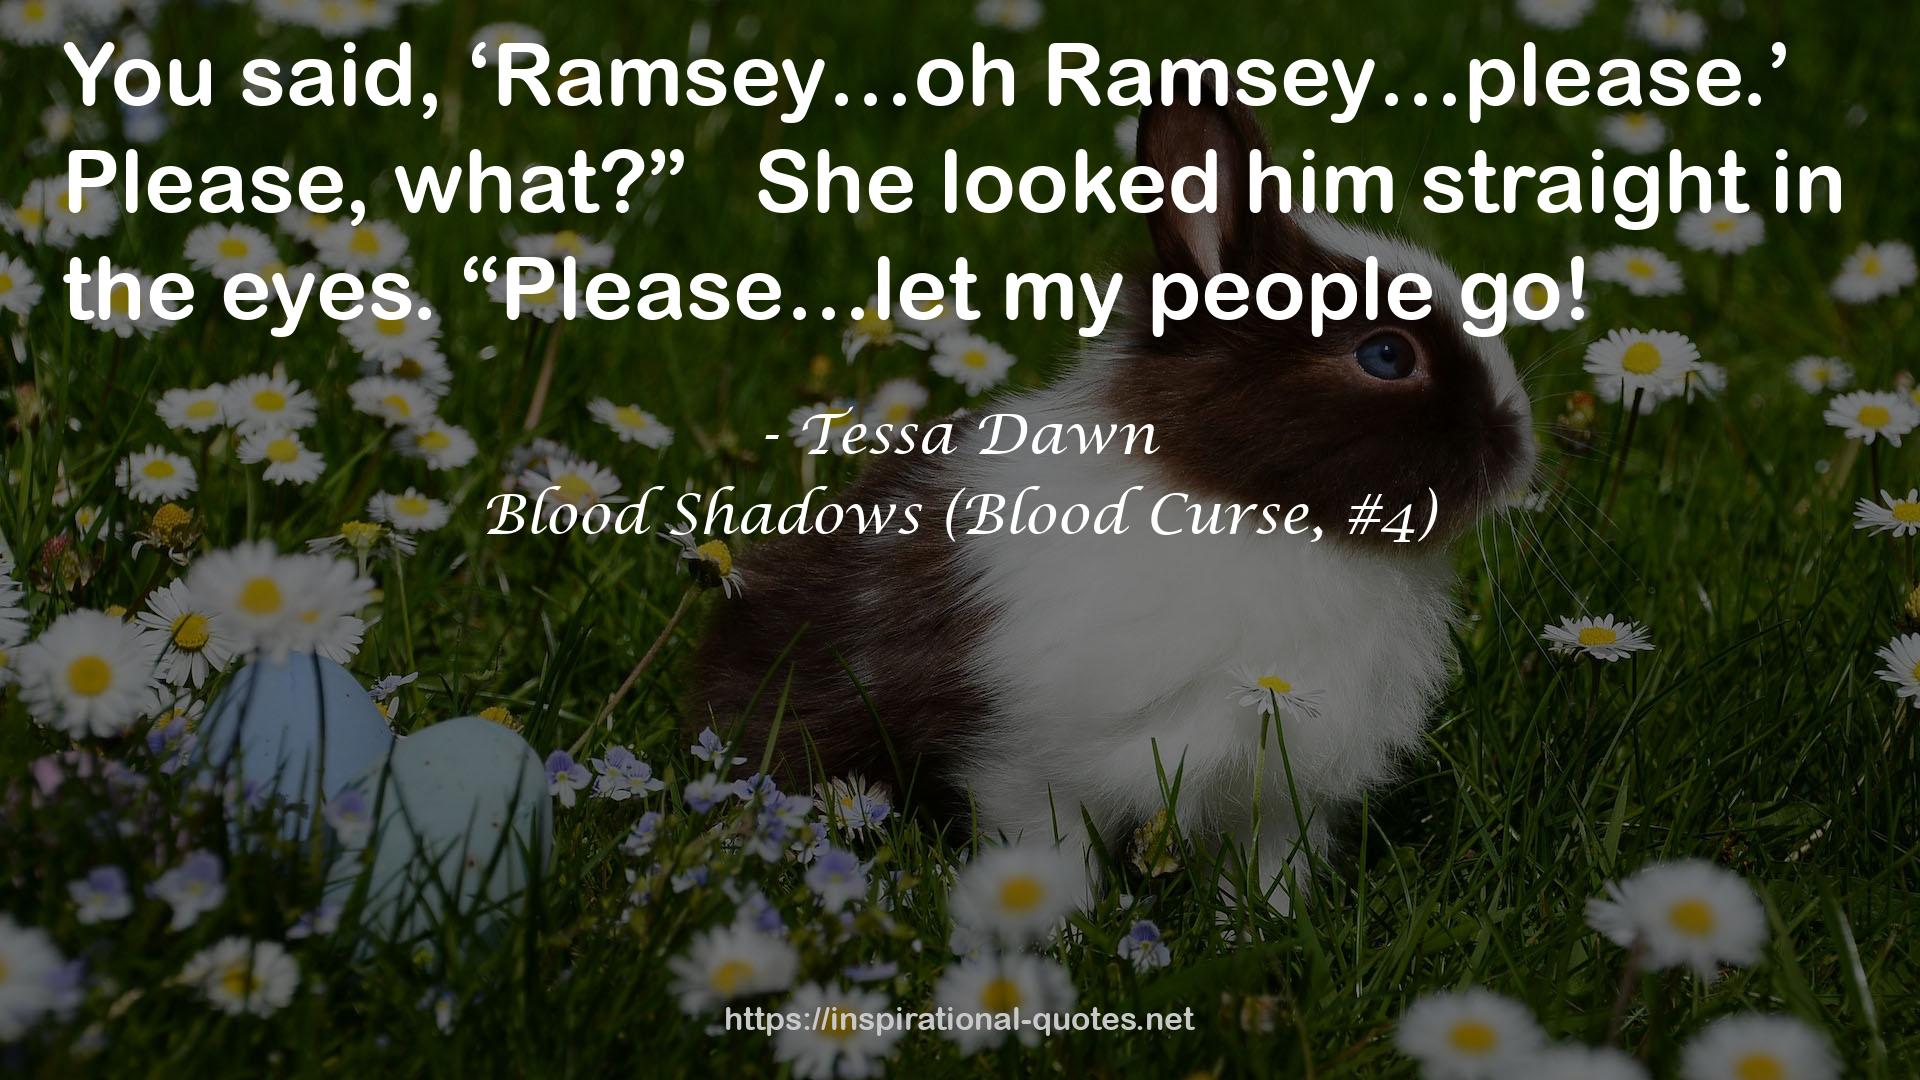 Blood Shadows (Blood Curse, #4) QUOTES